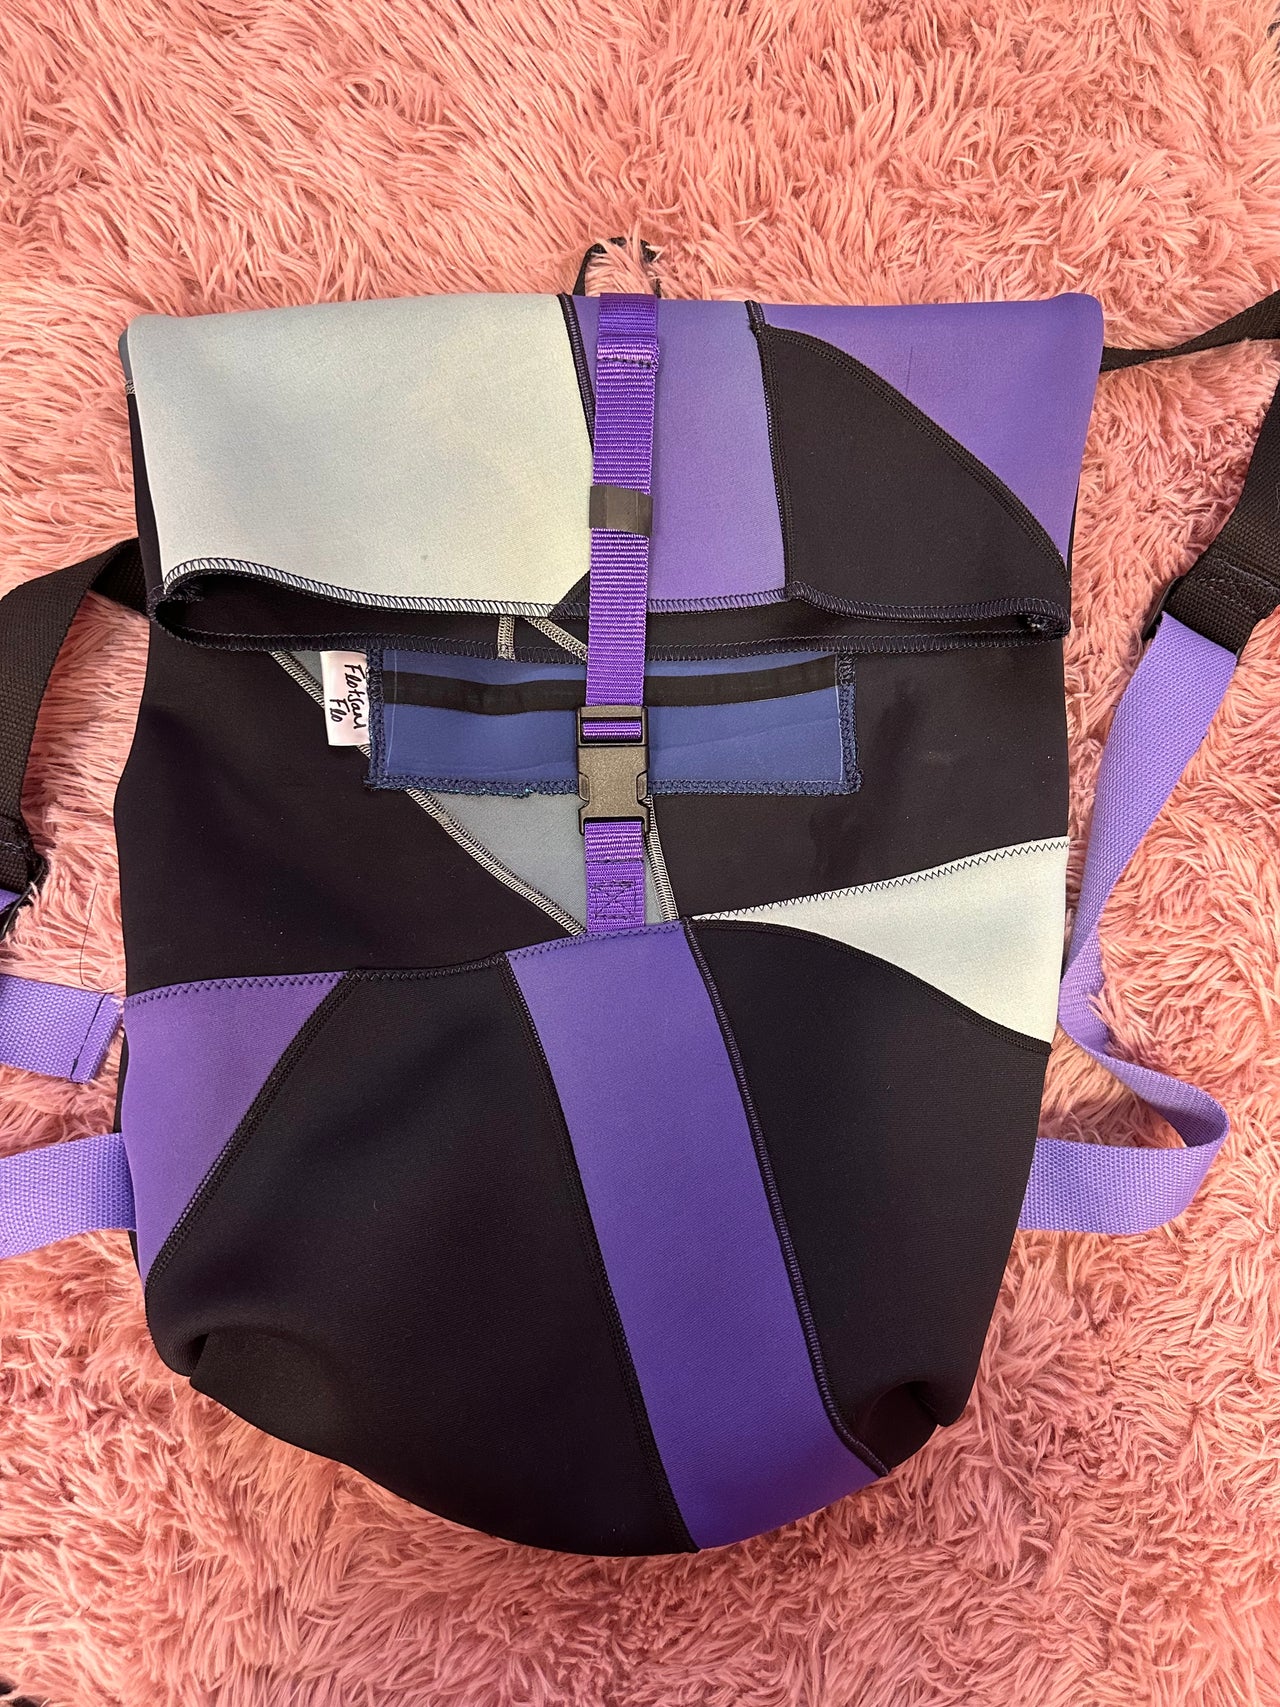 I used to be a Broken Wetsuit and Punctured Inner Tube - Upcycled Backpack